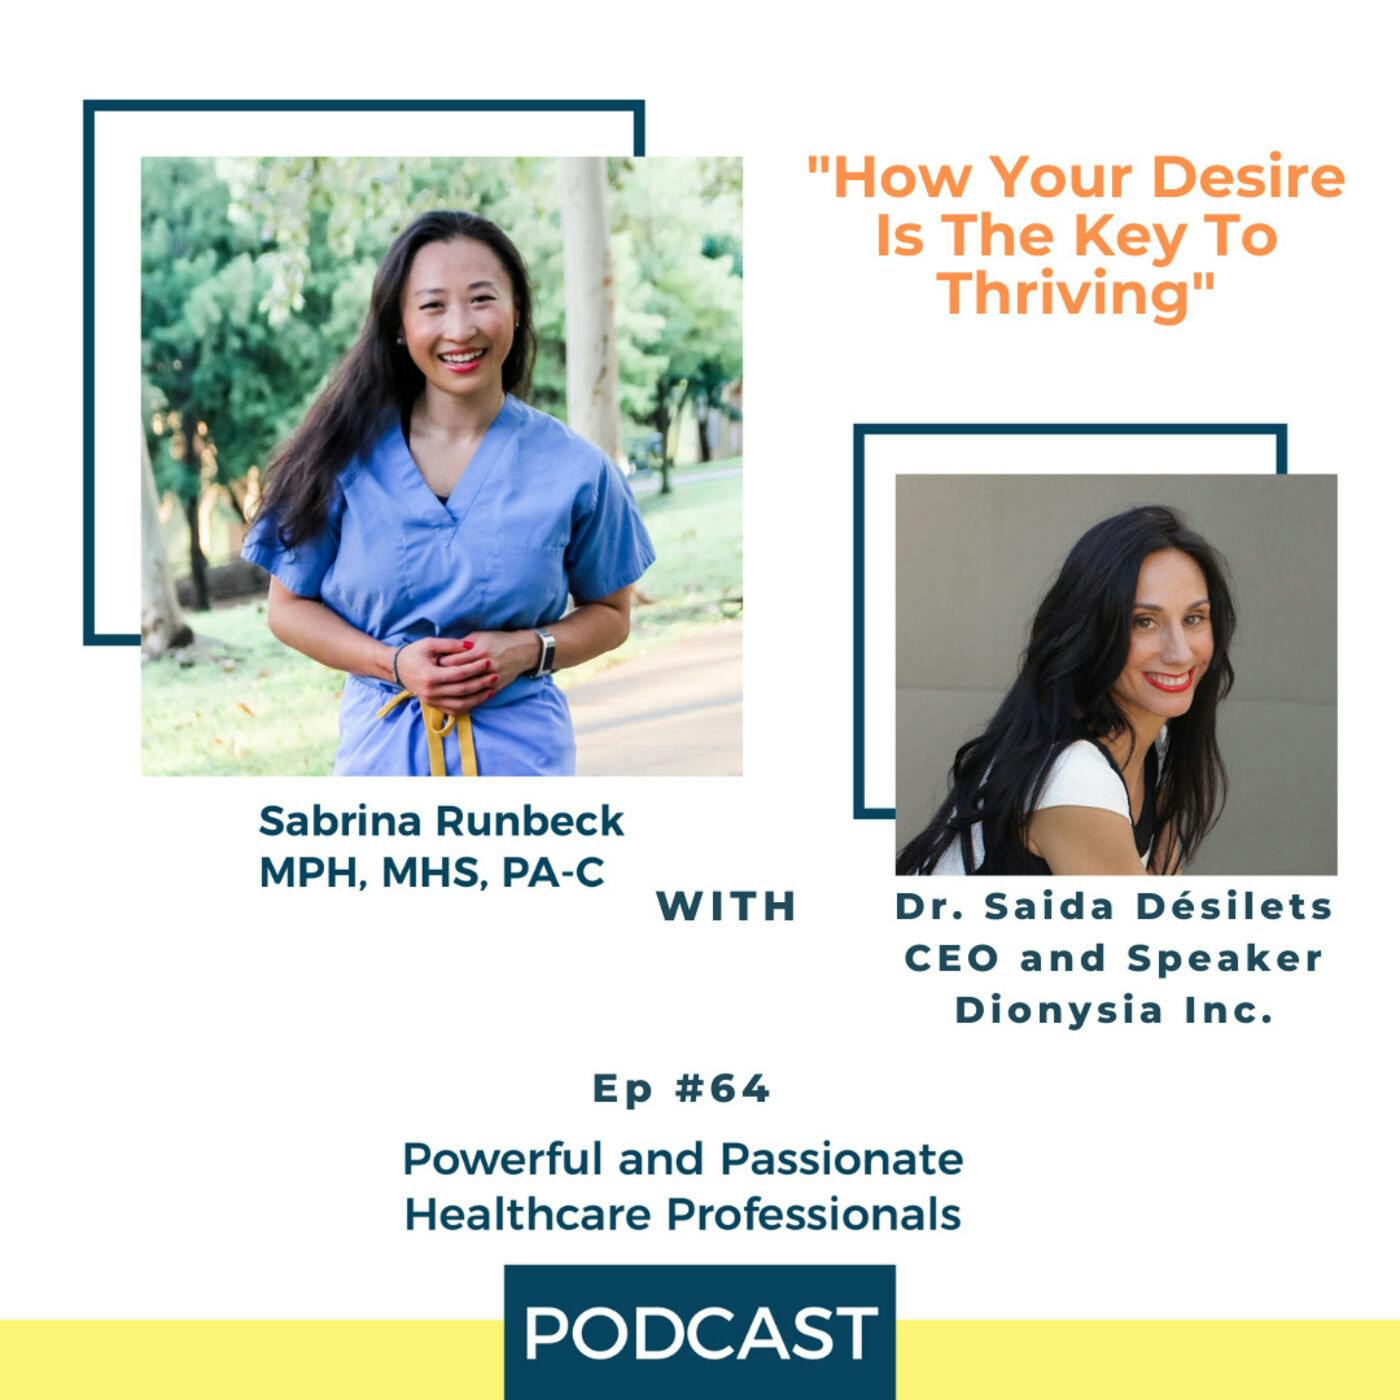 Ep 64 – How Your Desire Is The Key To Thriving with Dr. Saida Desilets